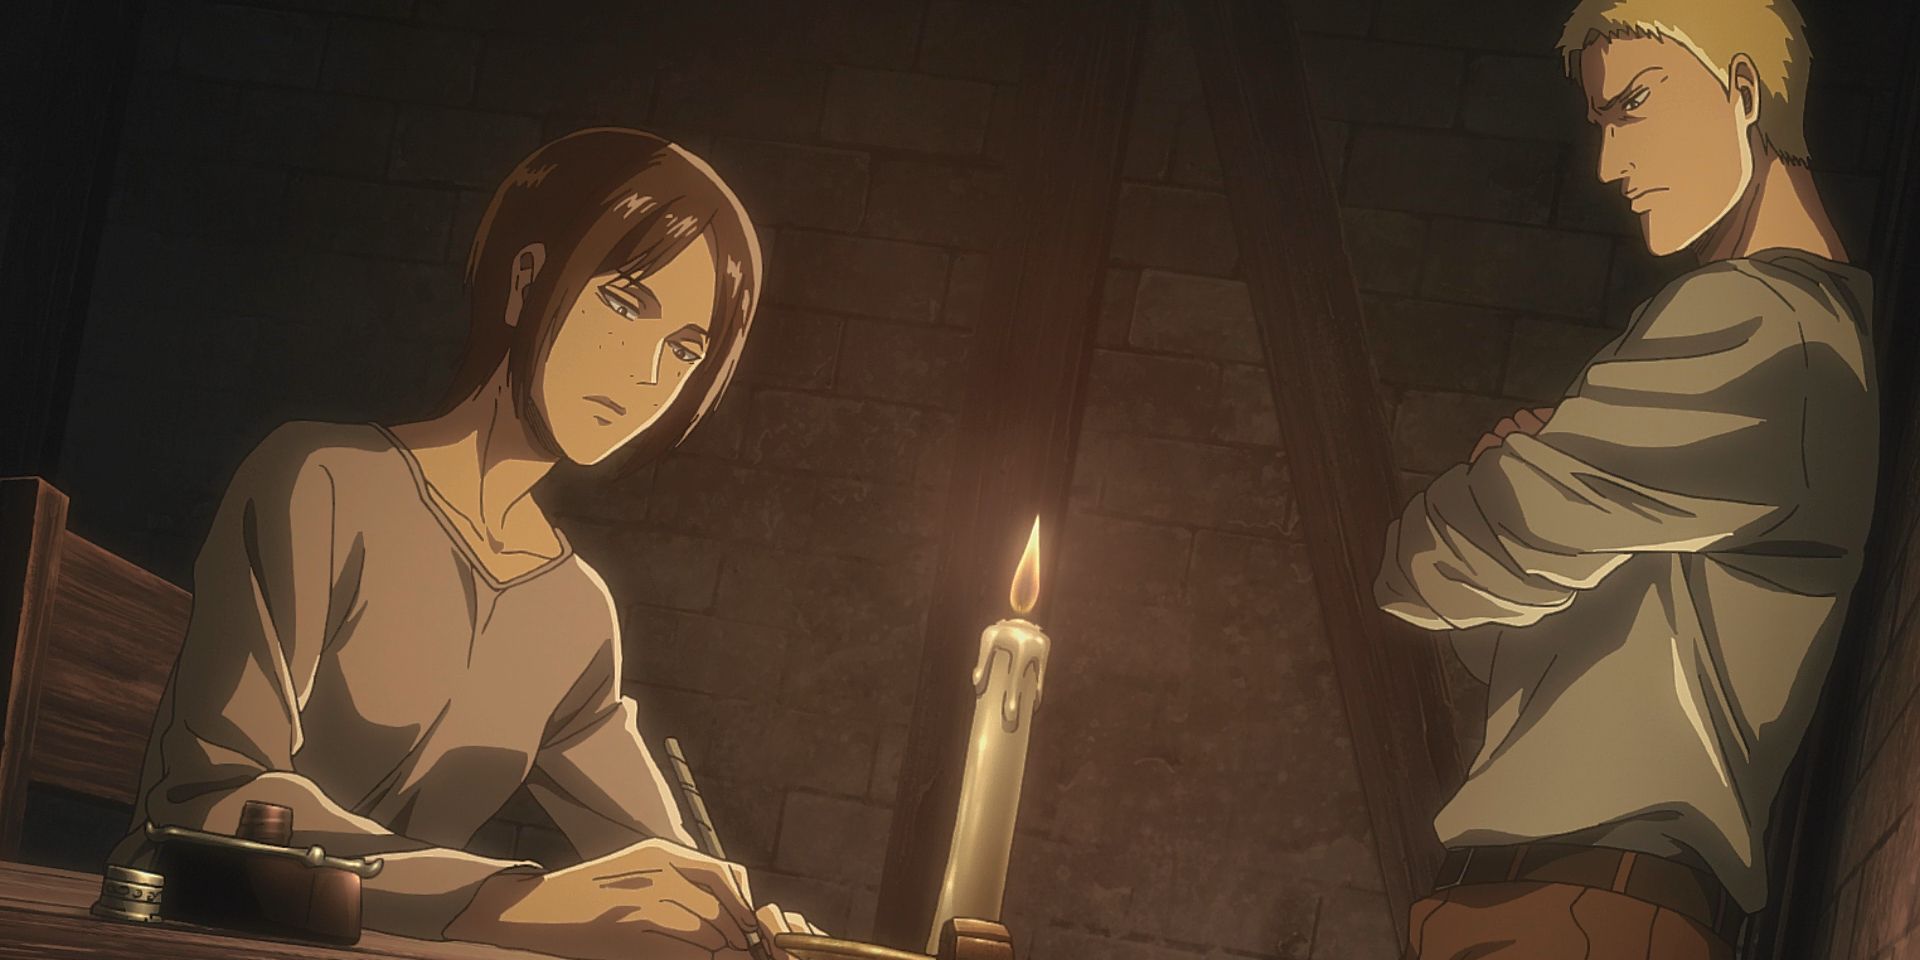 Ymri and Reiner while Ymir writes a note